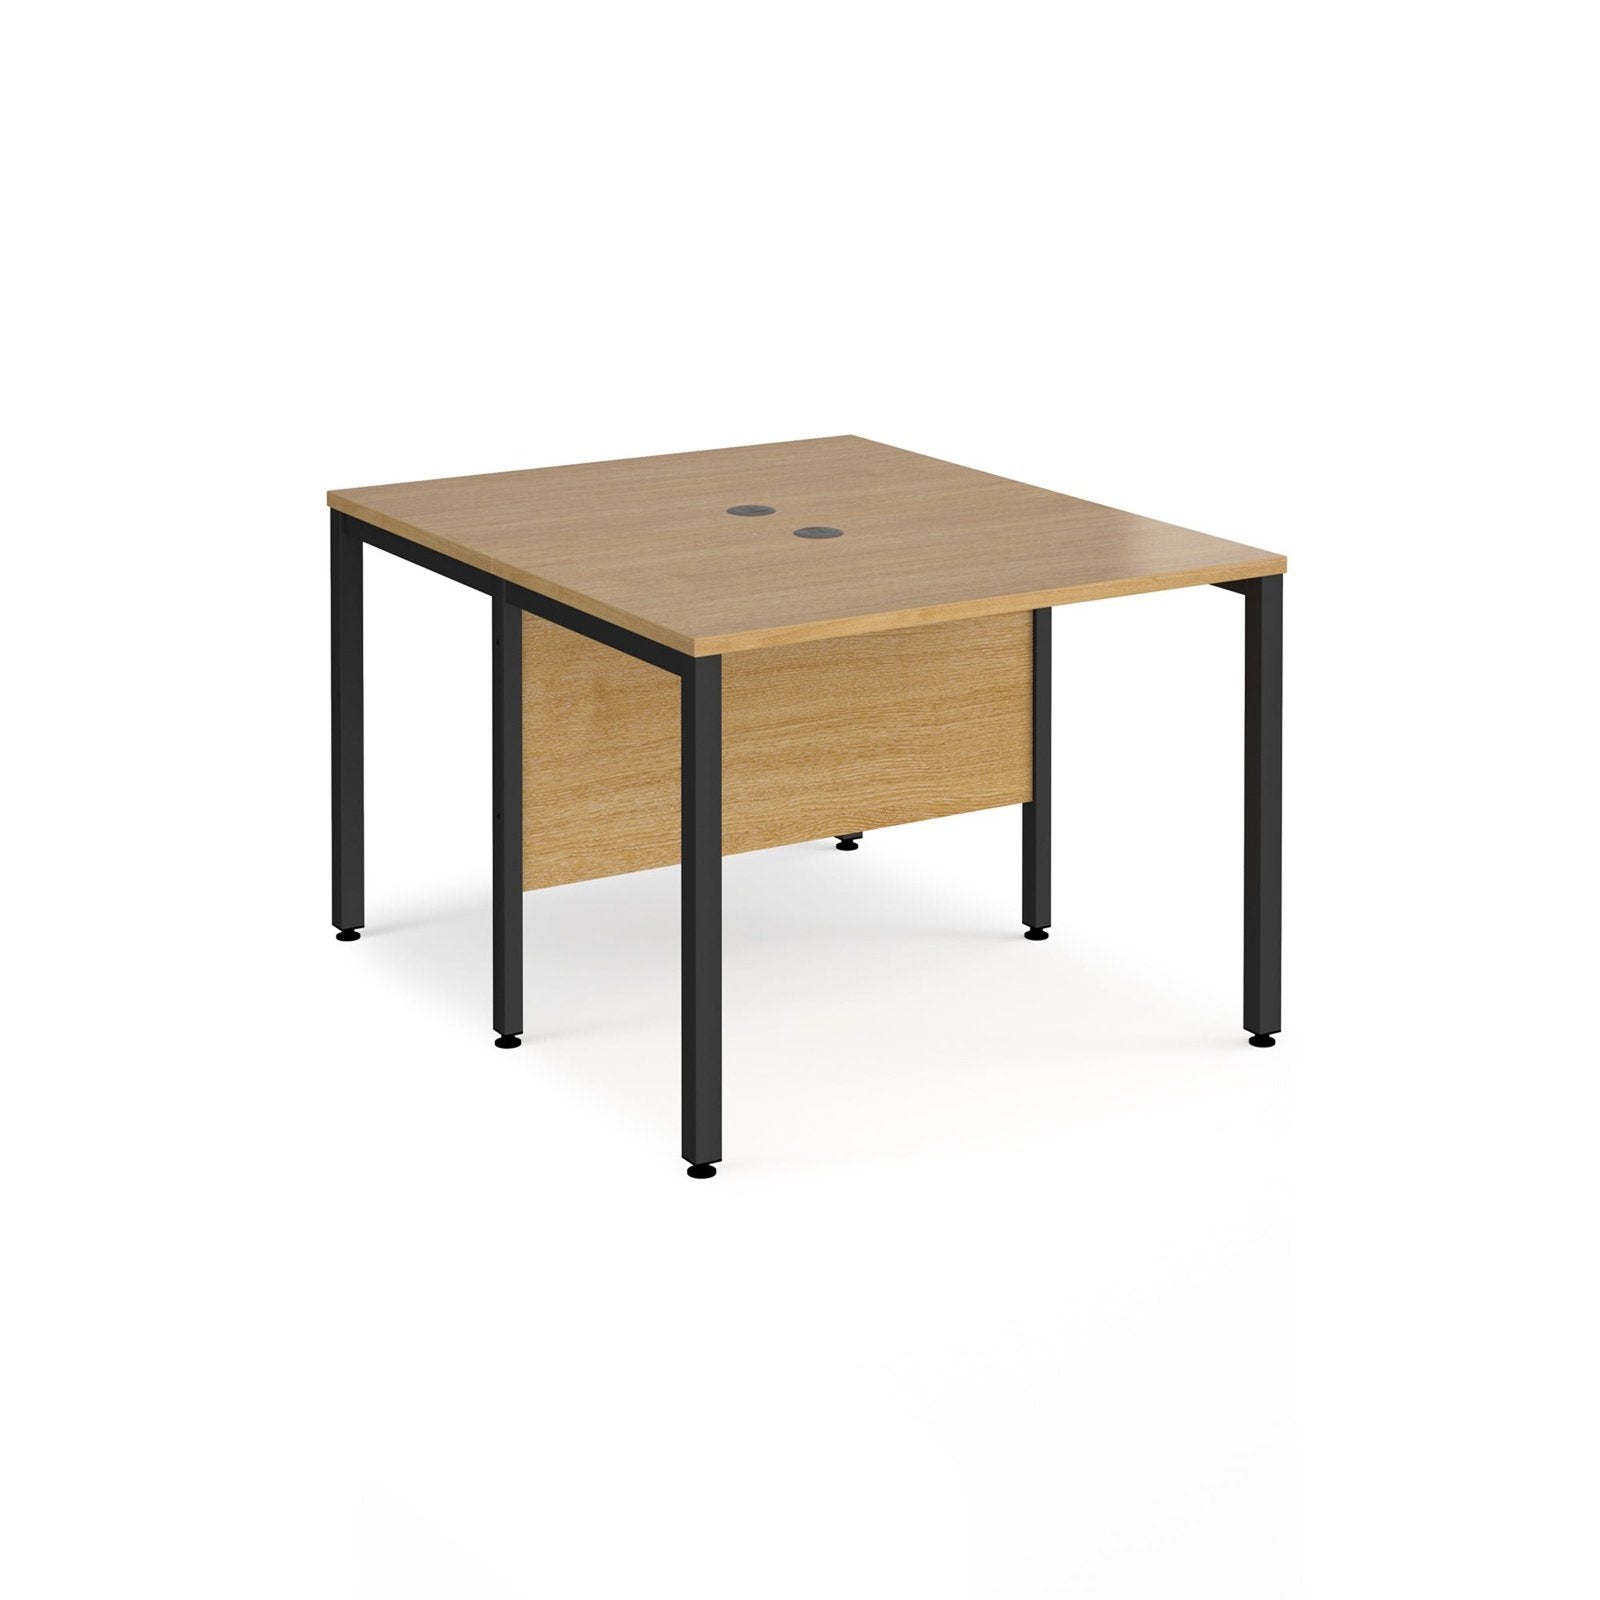 Maestro 25 bench leg to back straight desks 1200 deep - Office Products Online